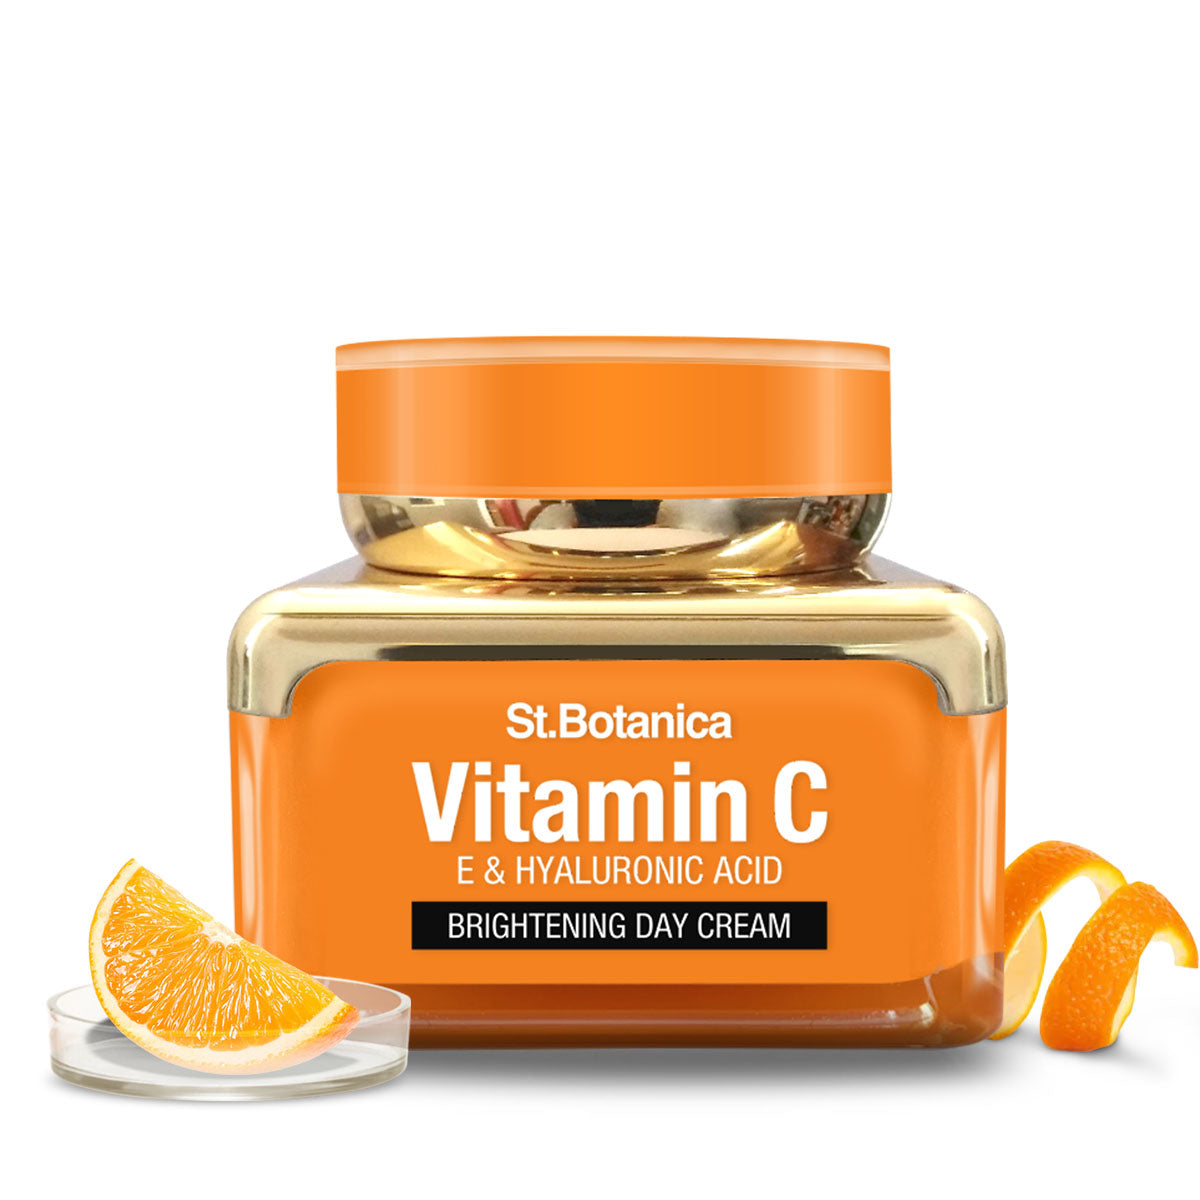 St.Botanica Vitamin C Brightening Day Cream With SPF 30 UVA/UVB PA+++ For Radiant Youthful Looking Skin, 50 g